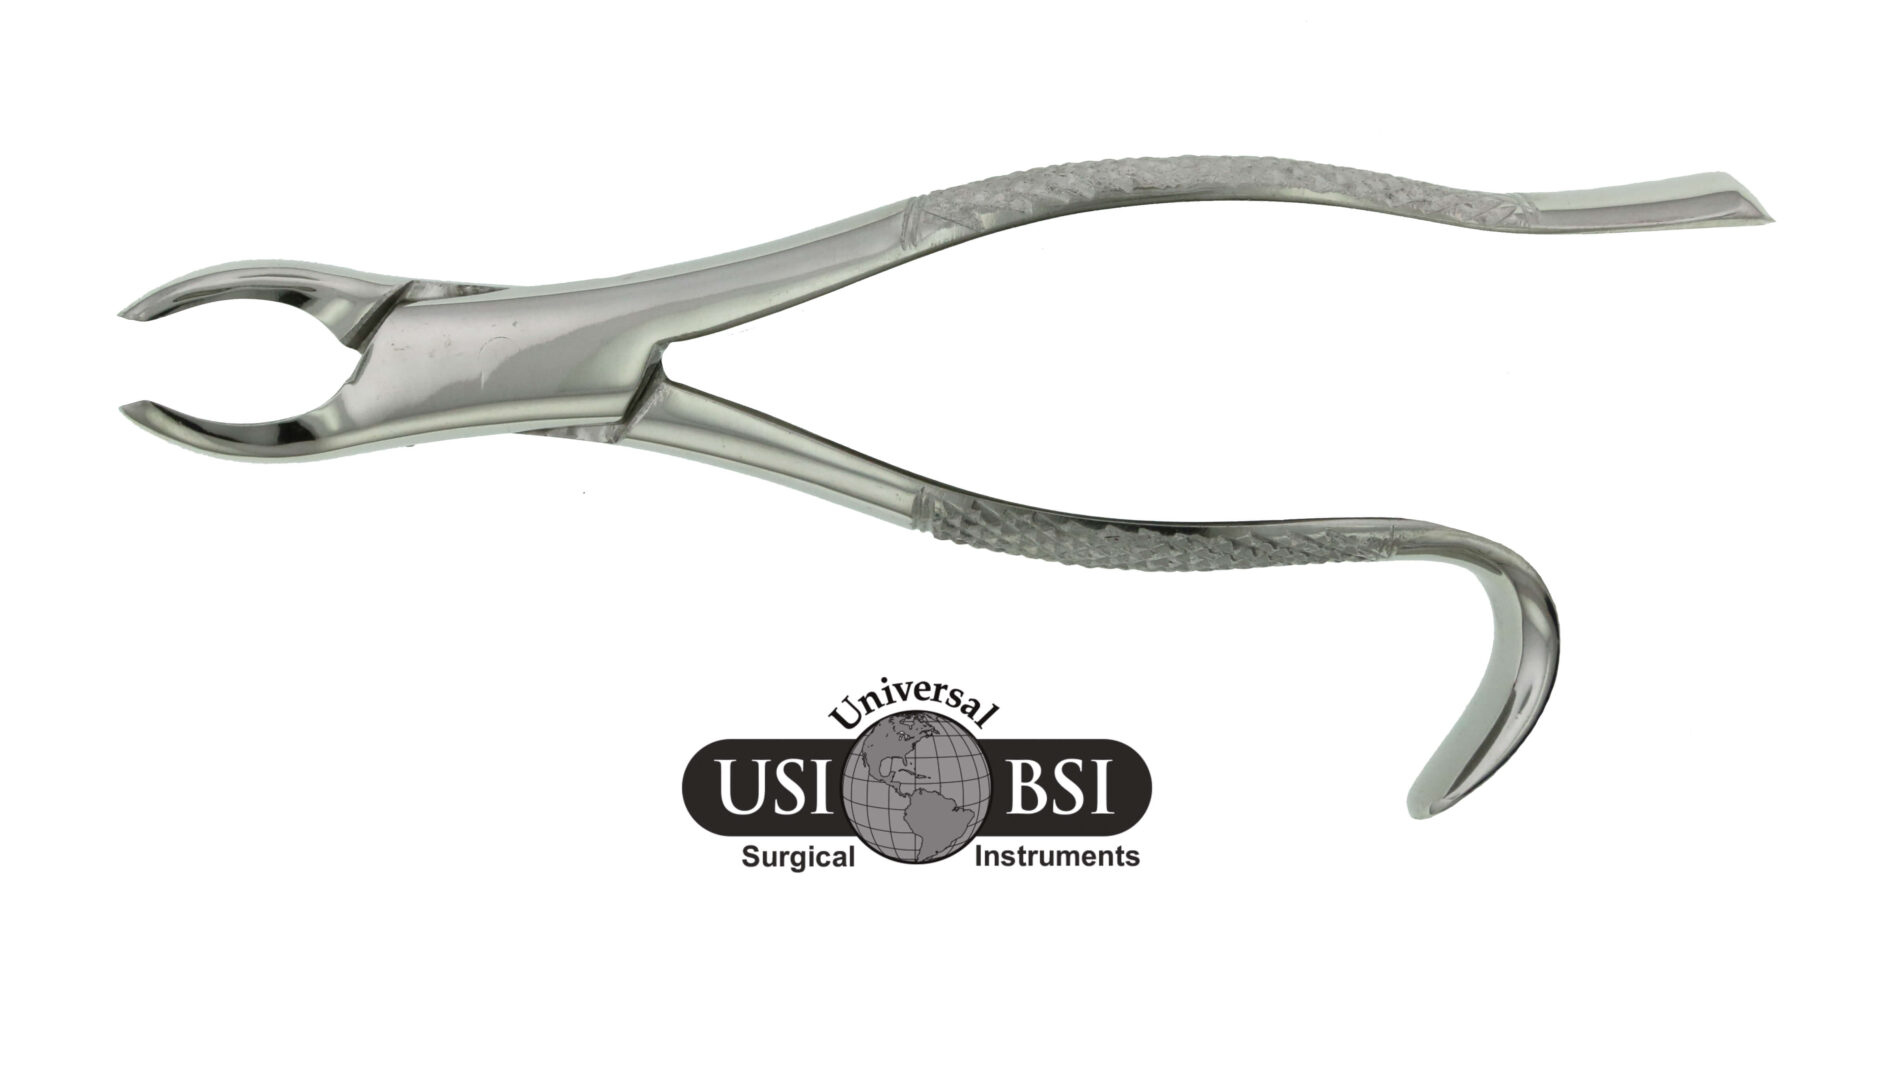 A pair of scissors with the us surgical instruments logo.